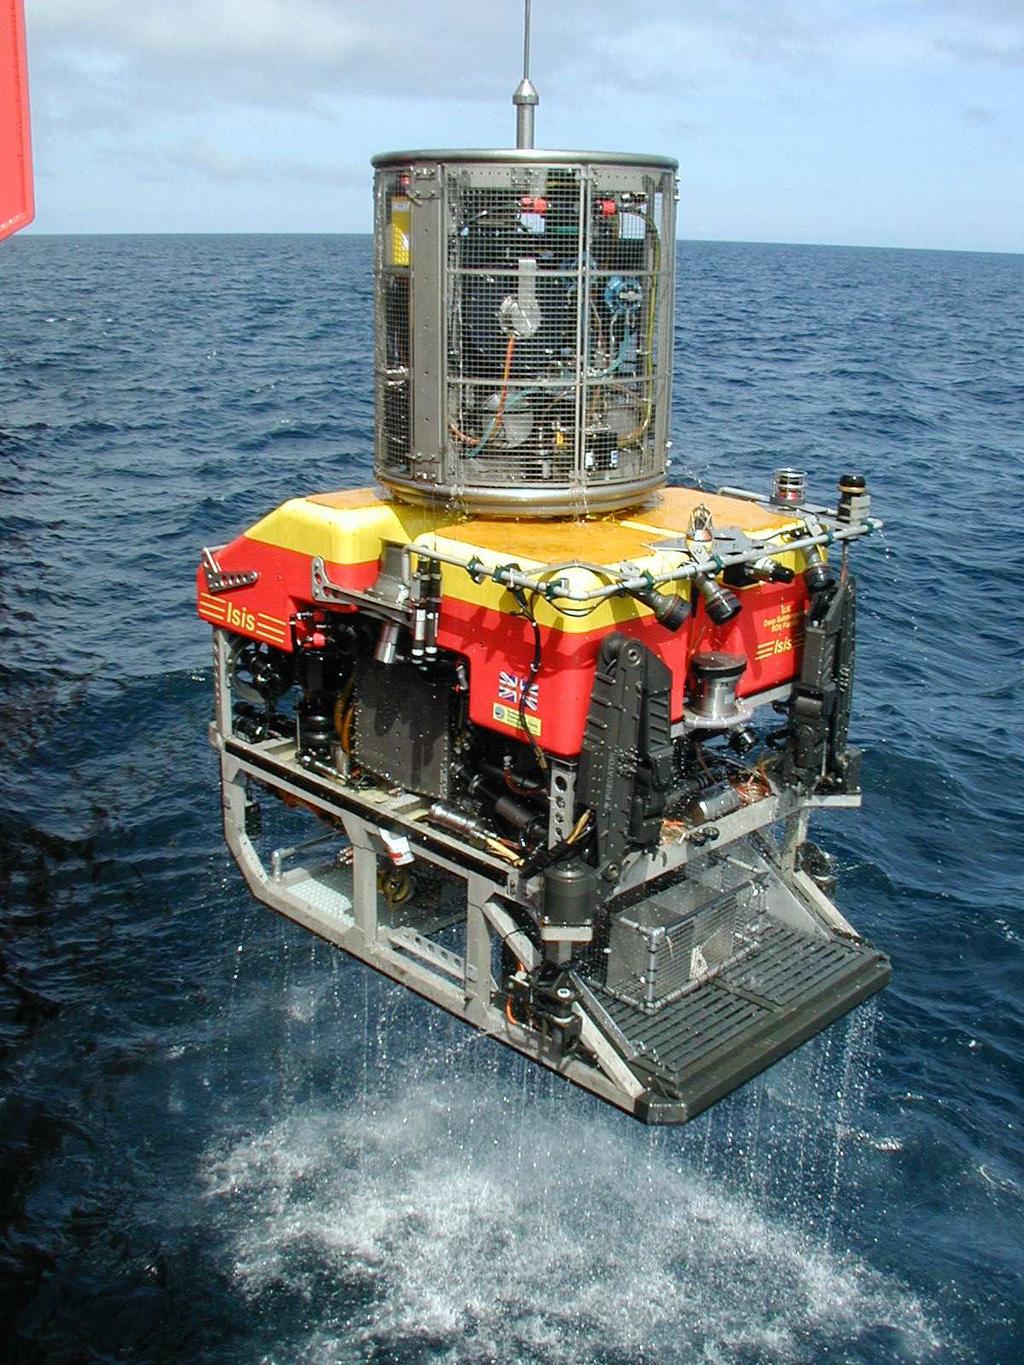 TMS Operations Dive 2 (2.324m water depth) Latching problems Heaving of the TMS prevented a smooth latching process. Mechanical latches proved to be unreliable.